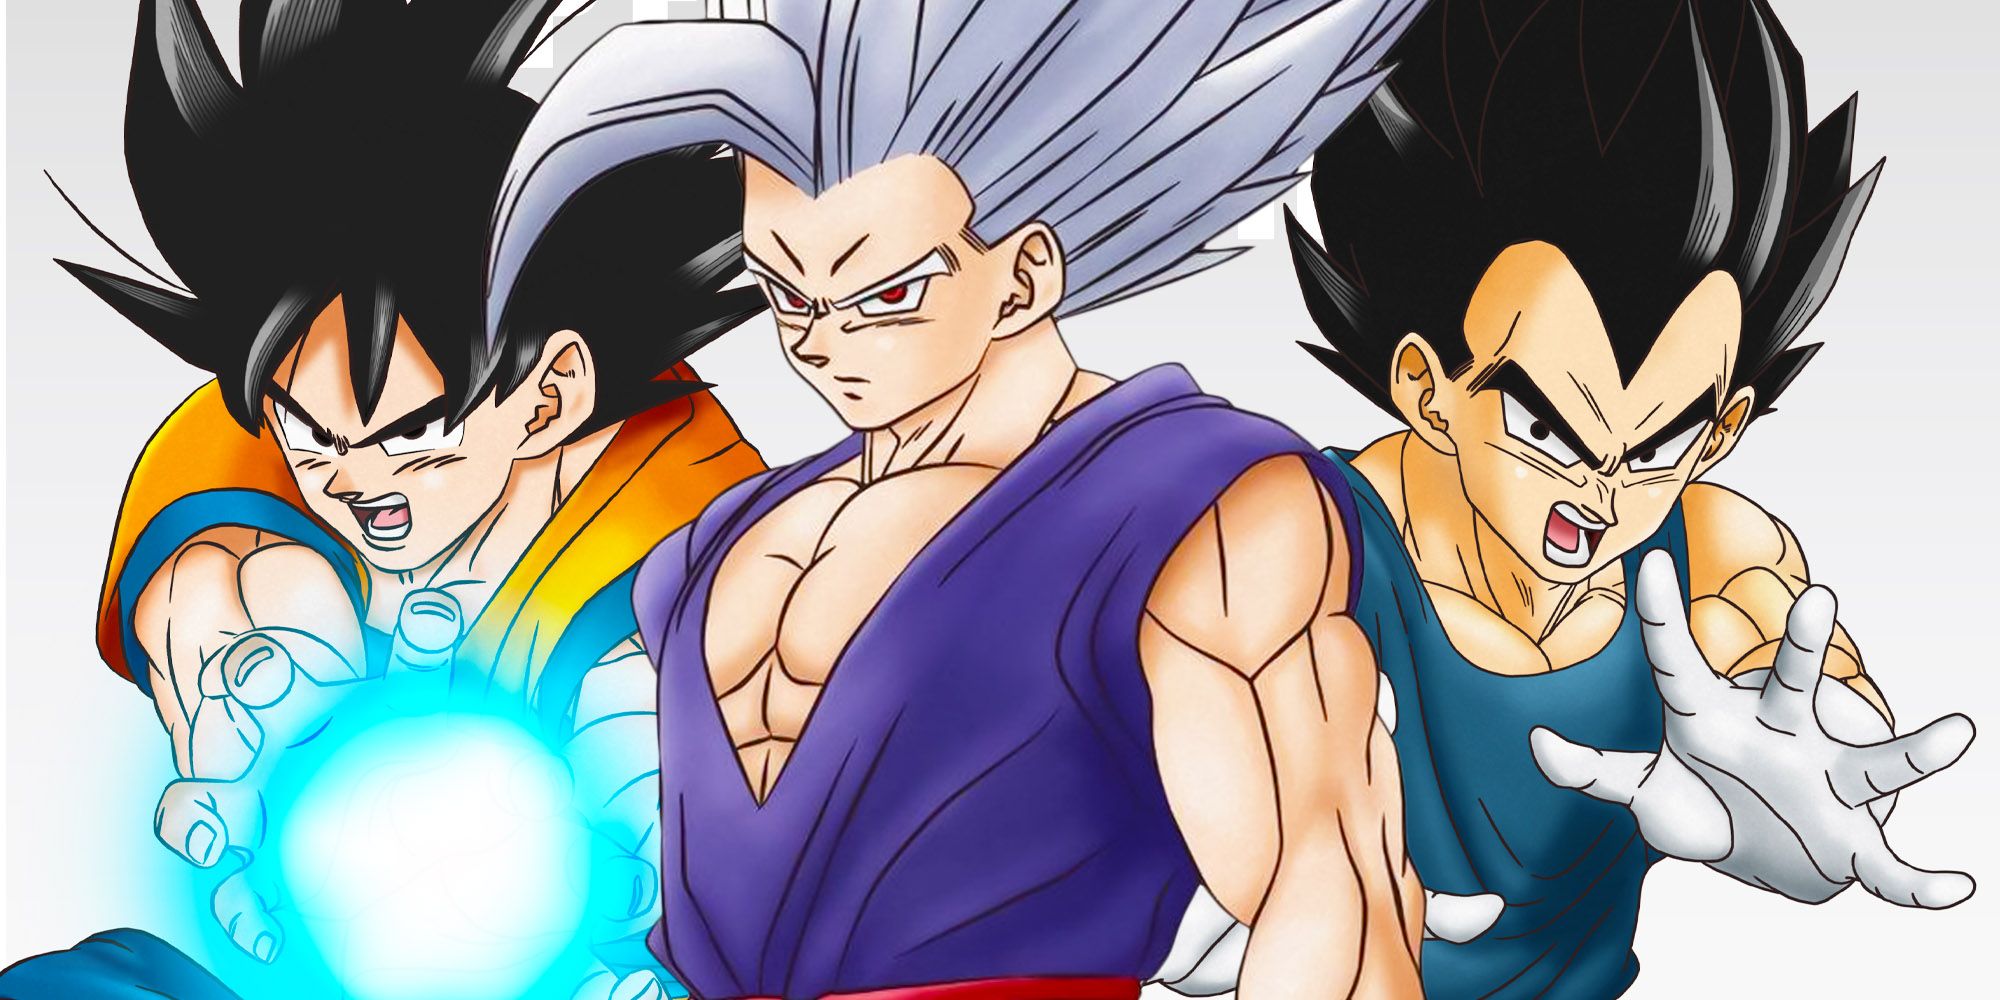 Dragon ball super collage image featuring Super Hero Beast Gohan, Goku, and Vegeta against a white background.